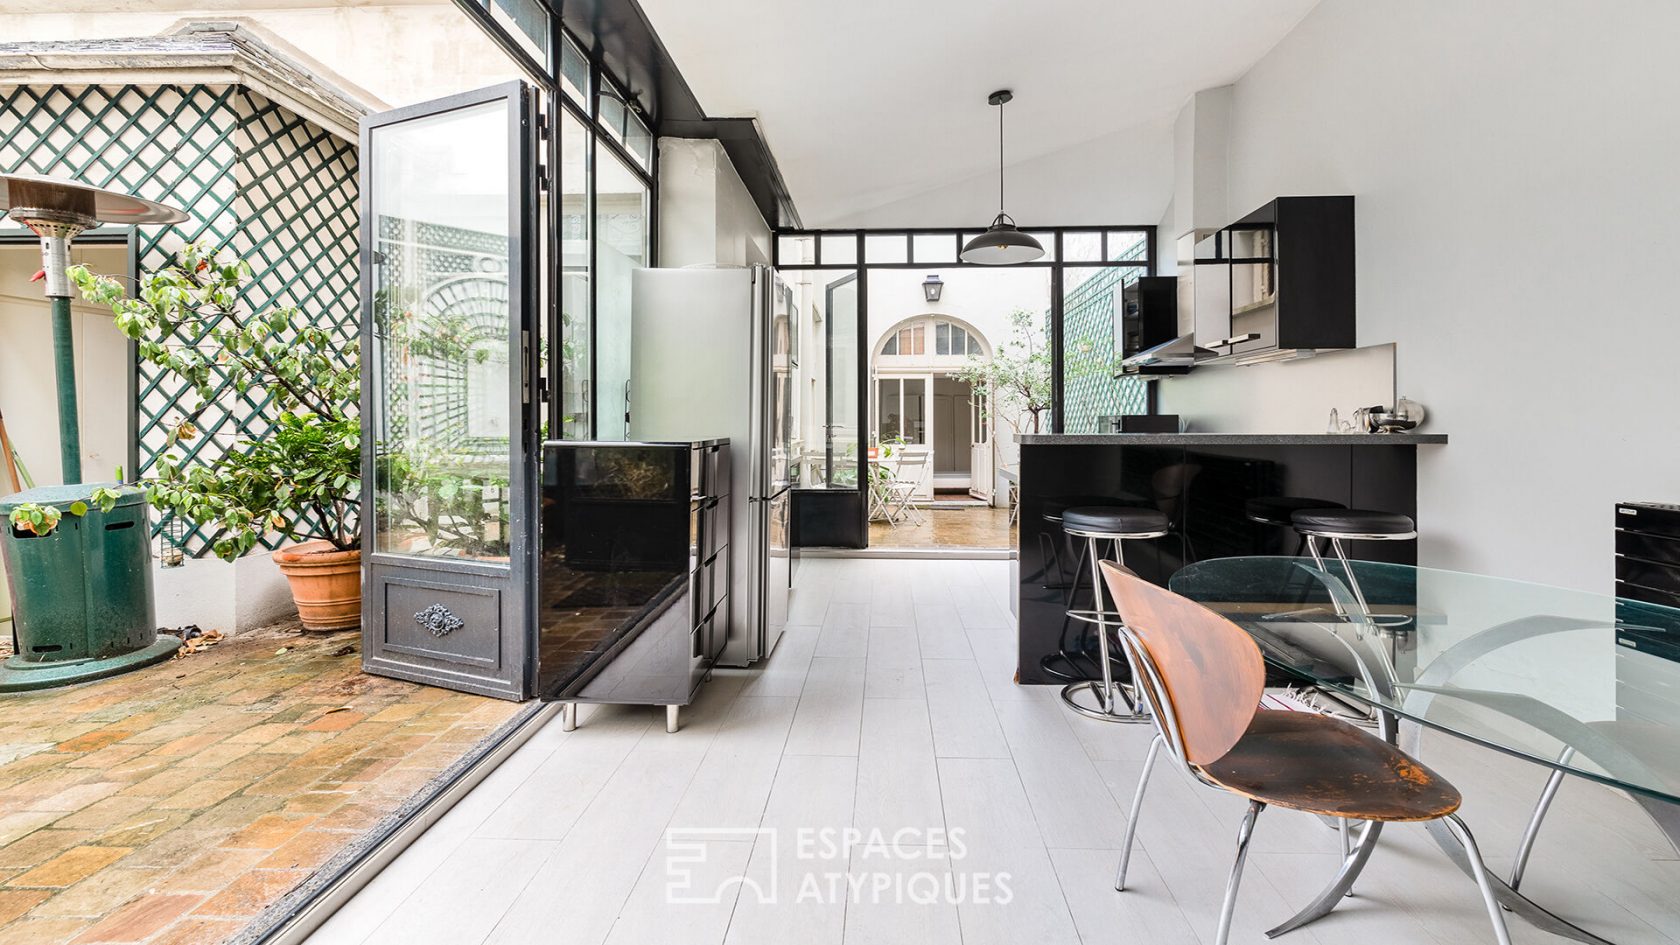 Duplex with outdoor spaces – Triangle d’Or district